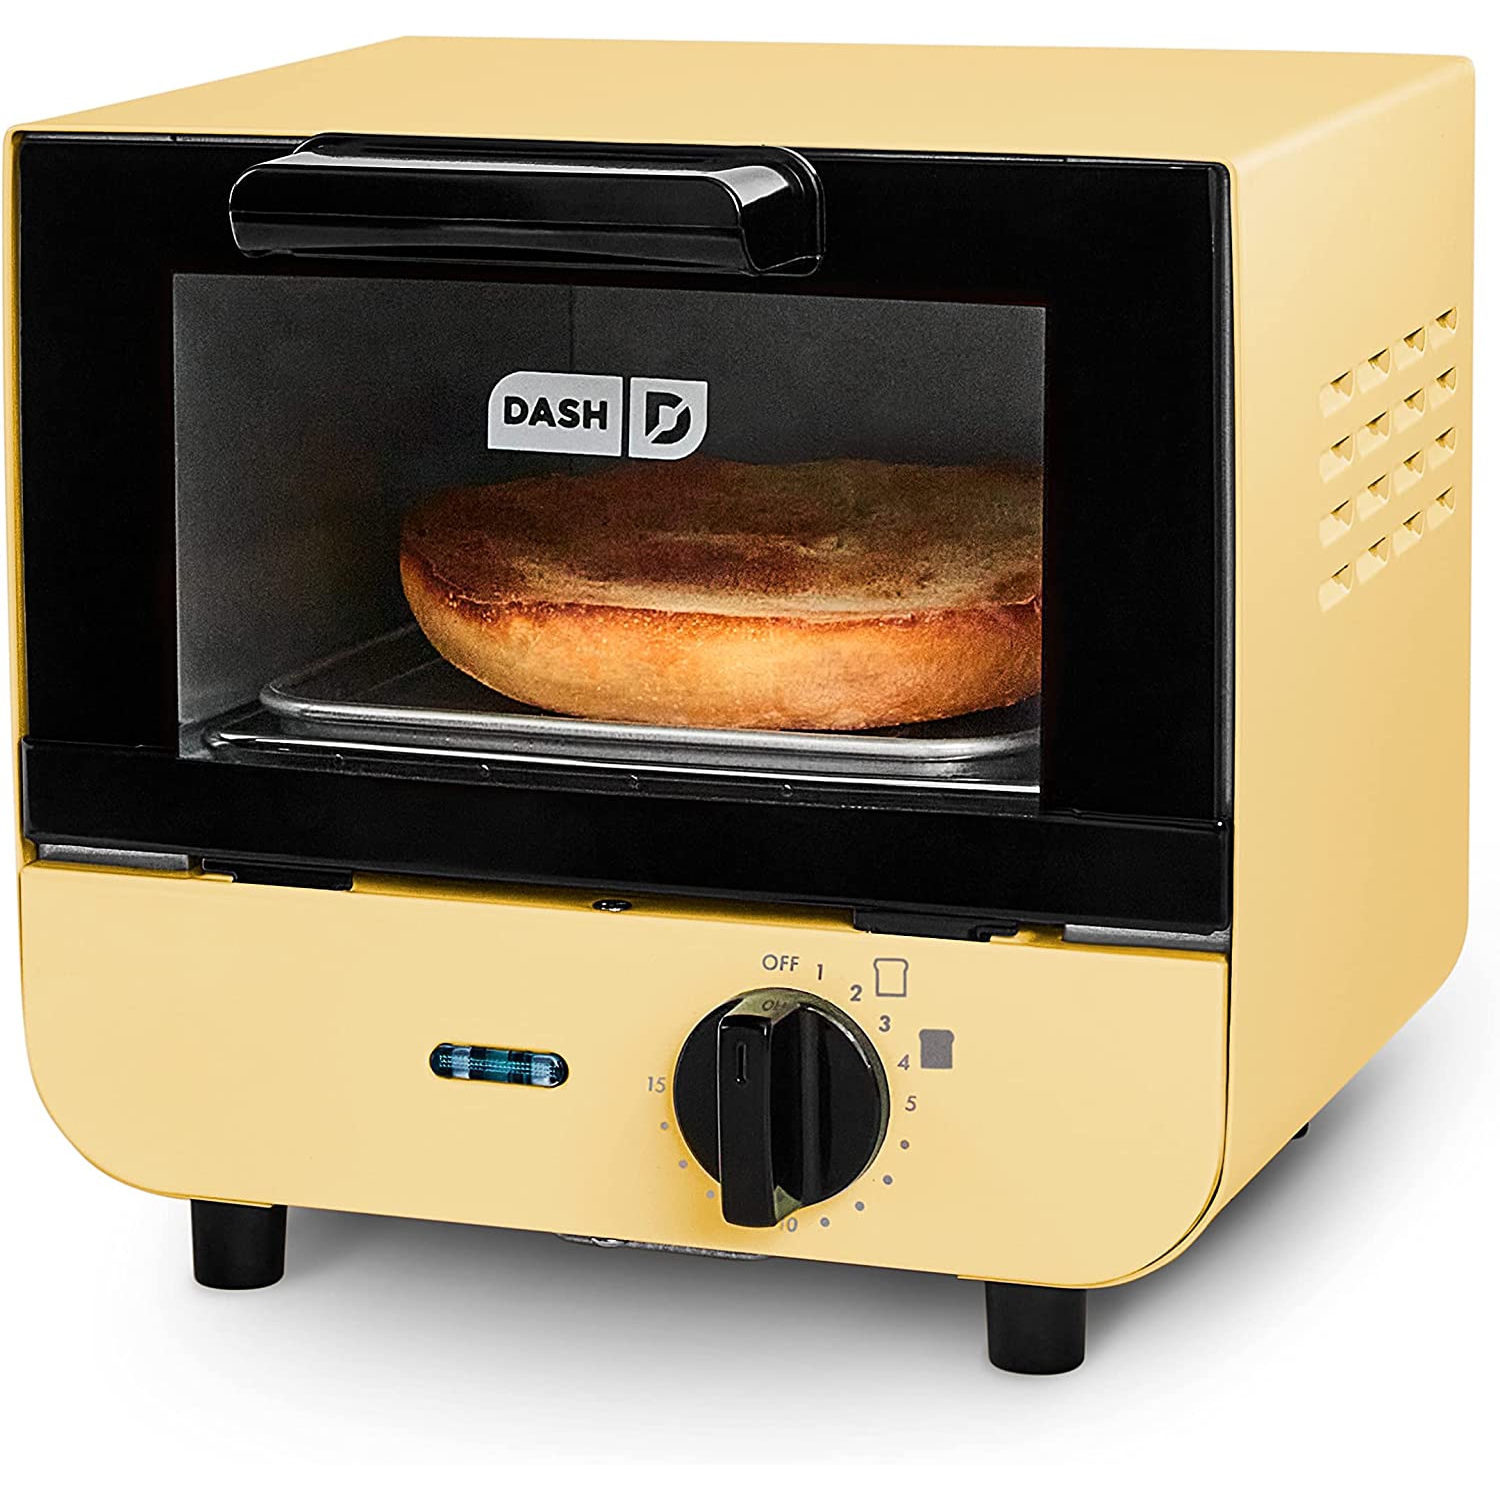 DASH Mini Toaster Oven Cooker for Bread, Bagels, Cookies, Pizza, Paninis & More with Baking Tray, Rack, Auto Shut Off Feature - Yellow